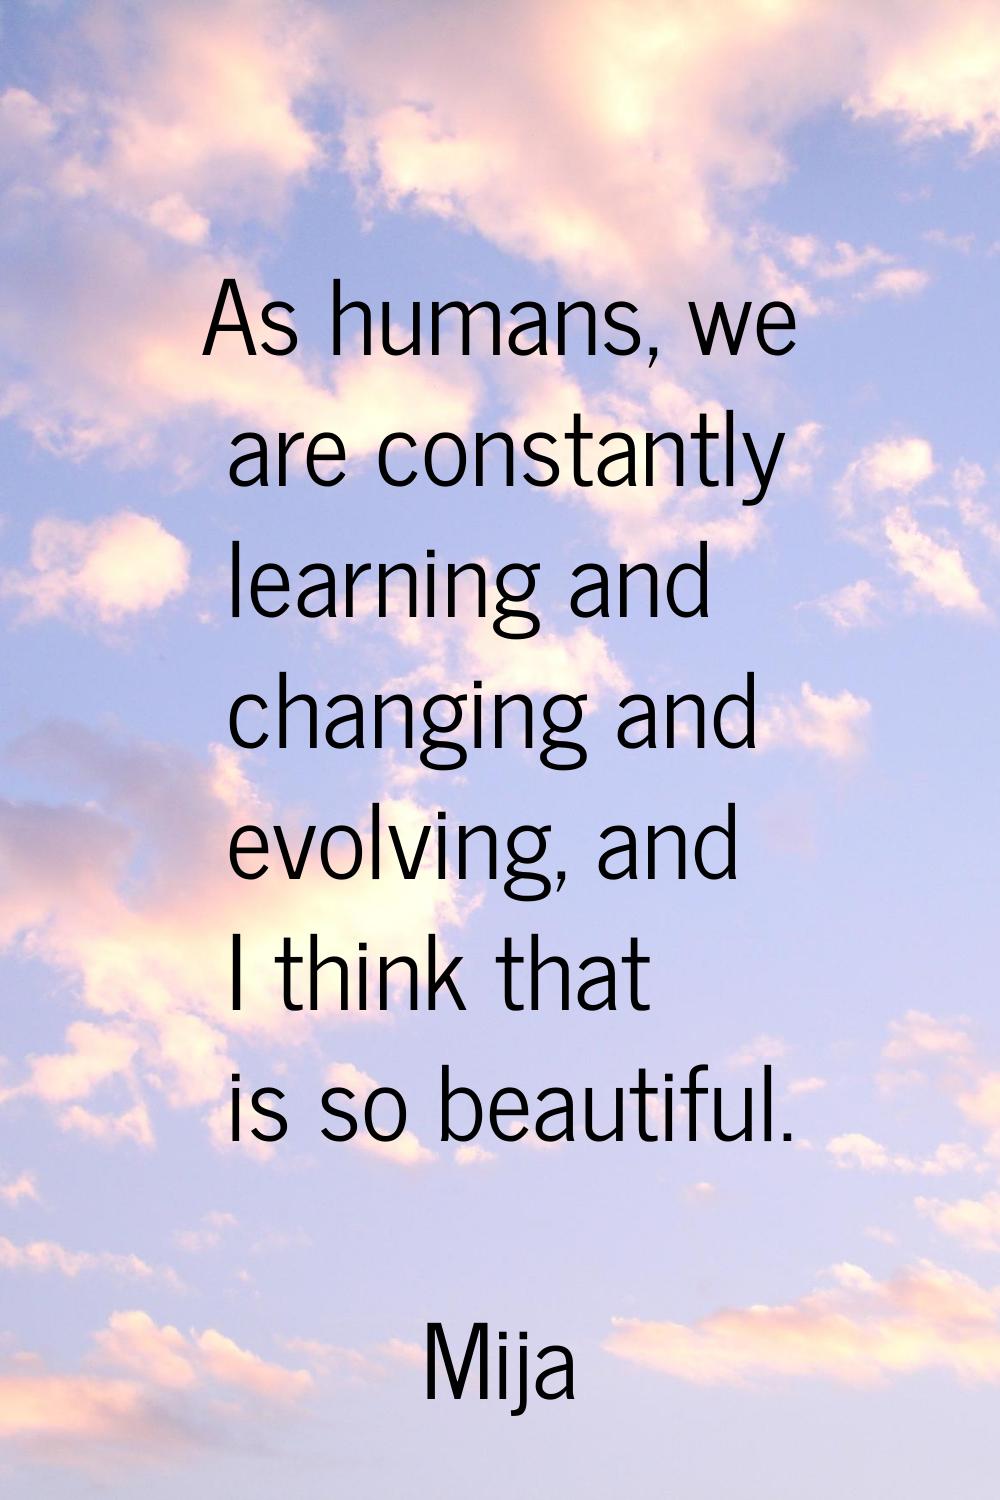 As humans, we are constantly learning and changing and evolving, and I think that is so beautiful.